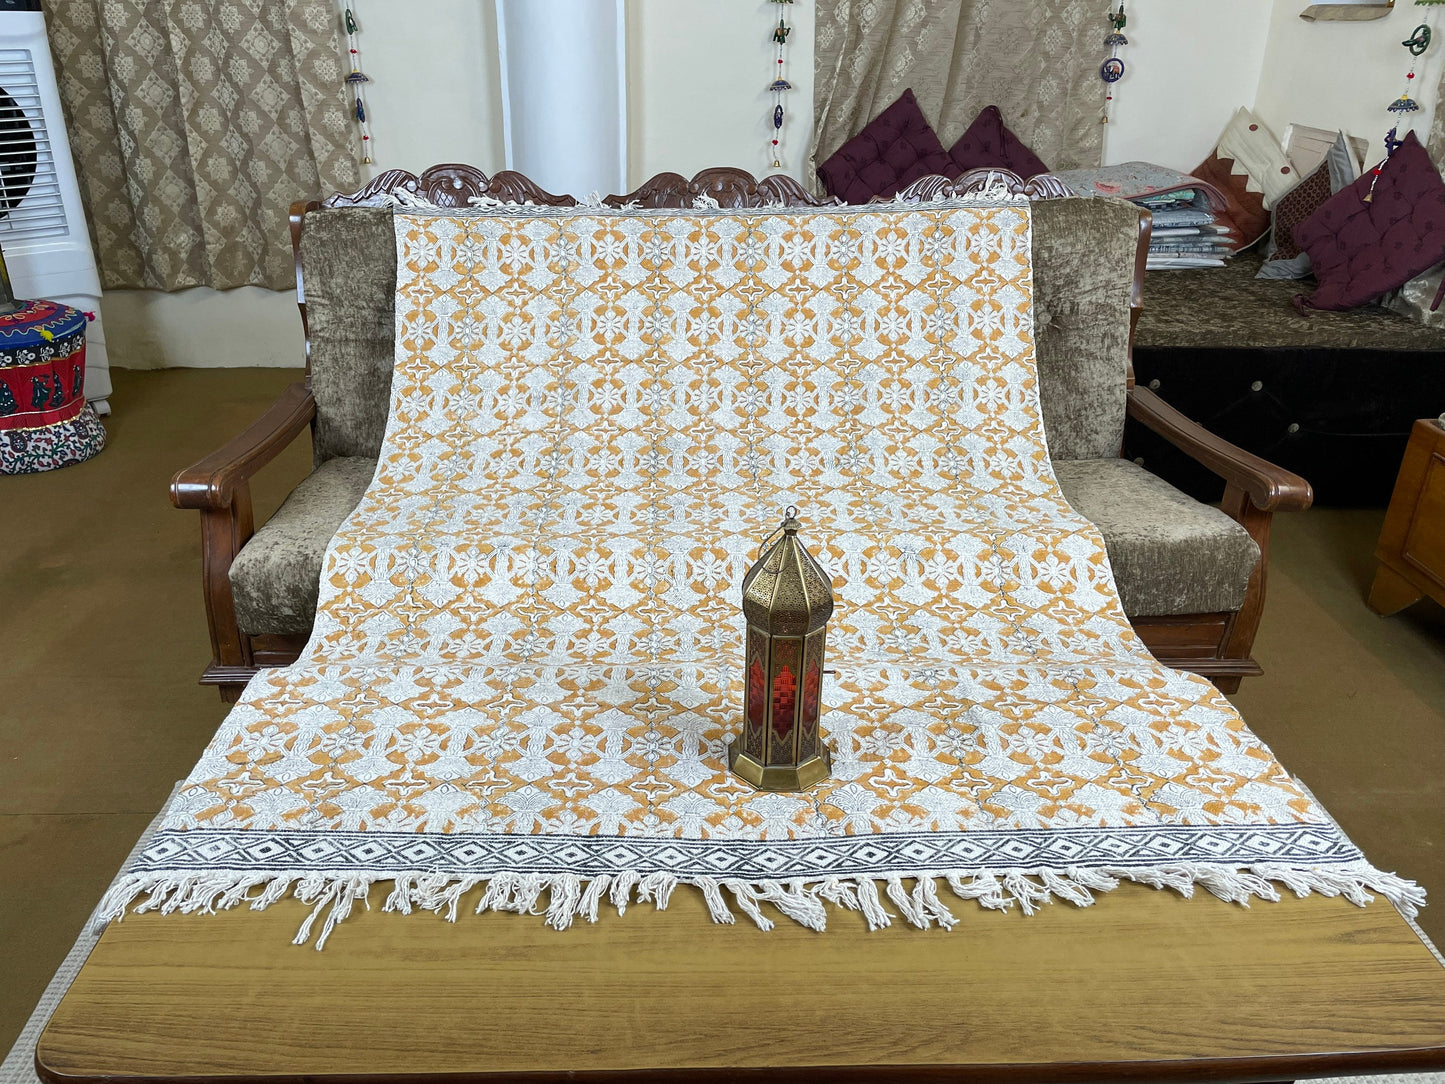 Indian Handmade Throw Blanket for Couch/Sofa, 53×60 Inch Woven Blanket for Bedroom Living Room, Home Decor, Housewarming Gift